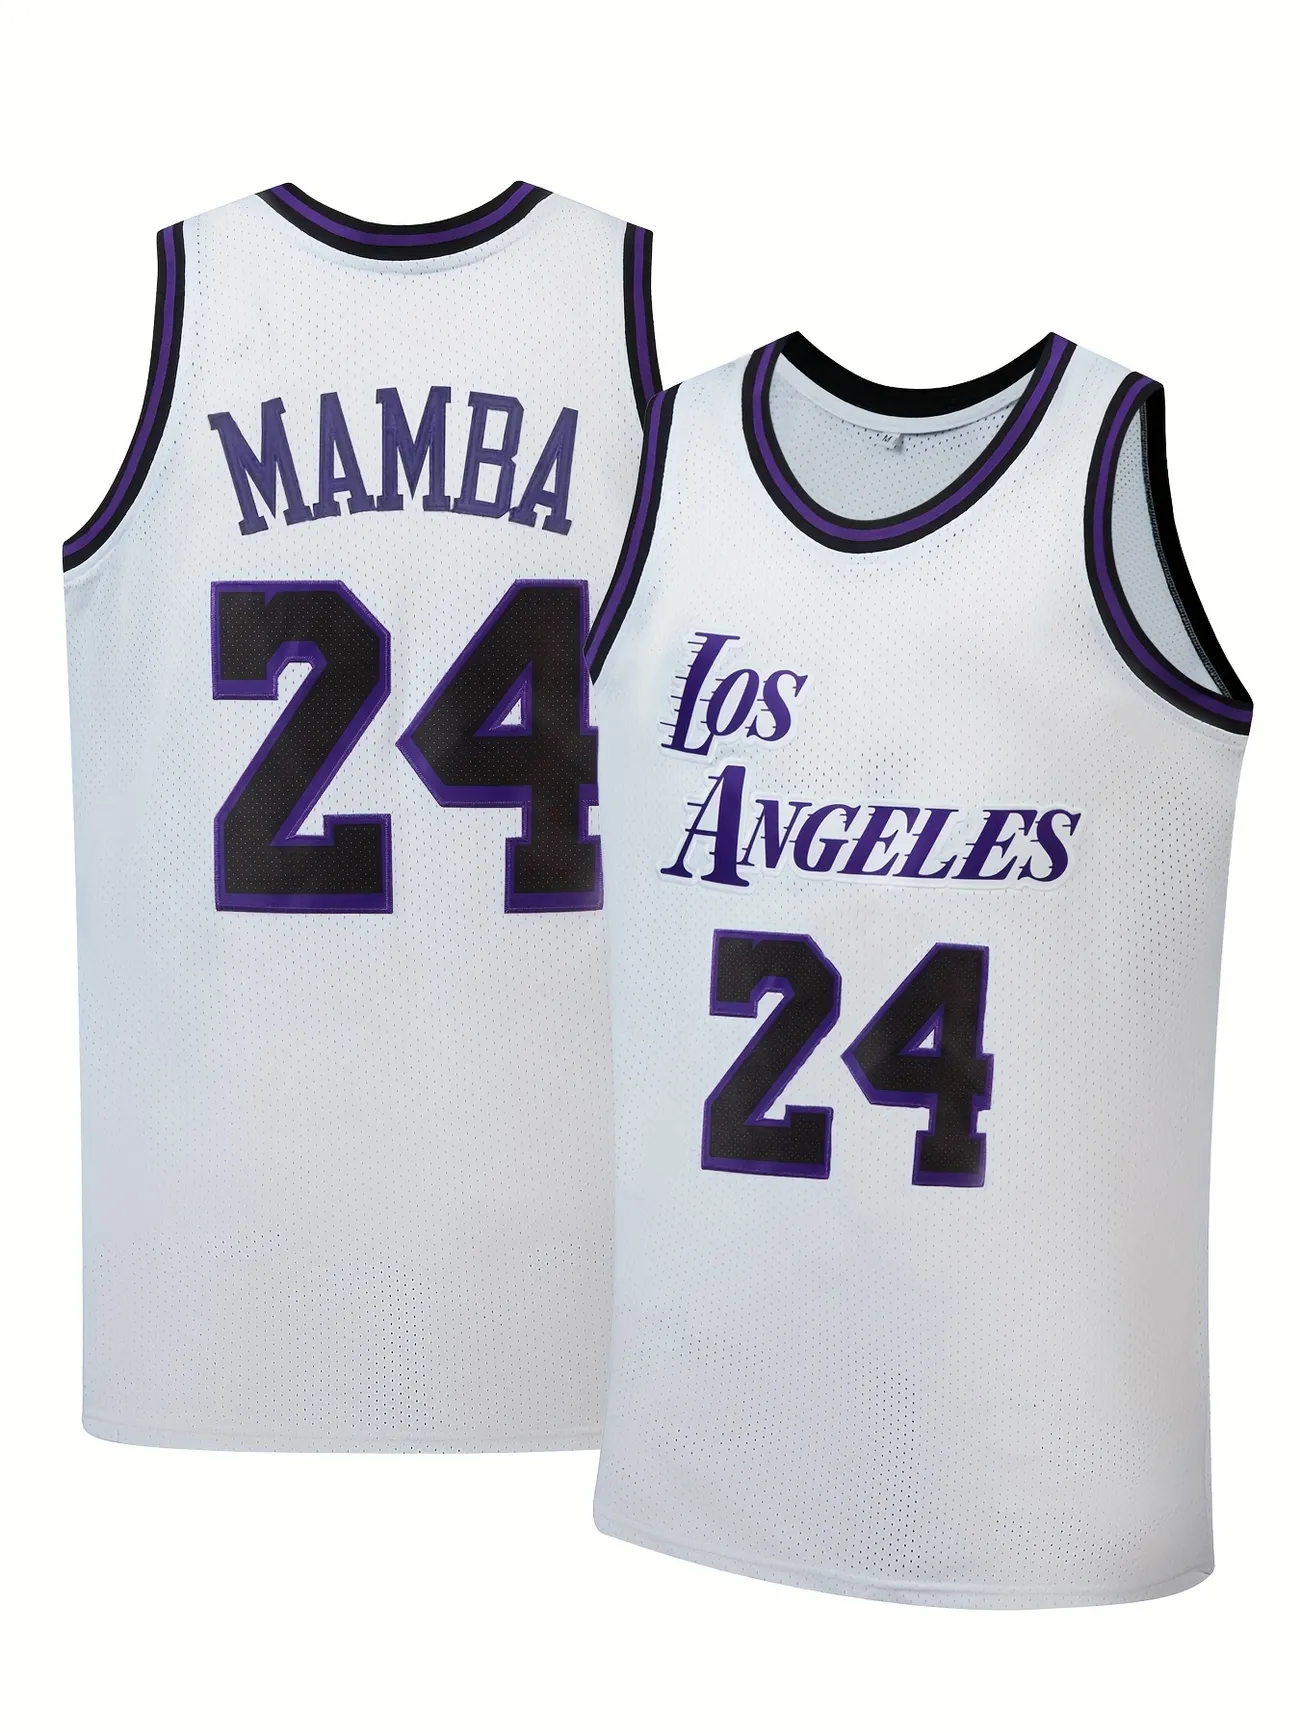 Temu Men's Los Angeles #24 Mamba Basketball Jersey, Retro Embroidery Breathable Sports Uniform, Sleeveless Basketball Shirt for Training Competition